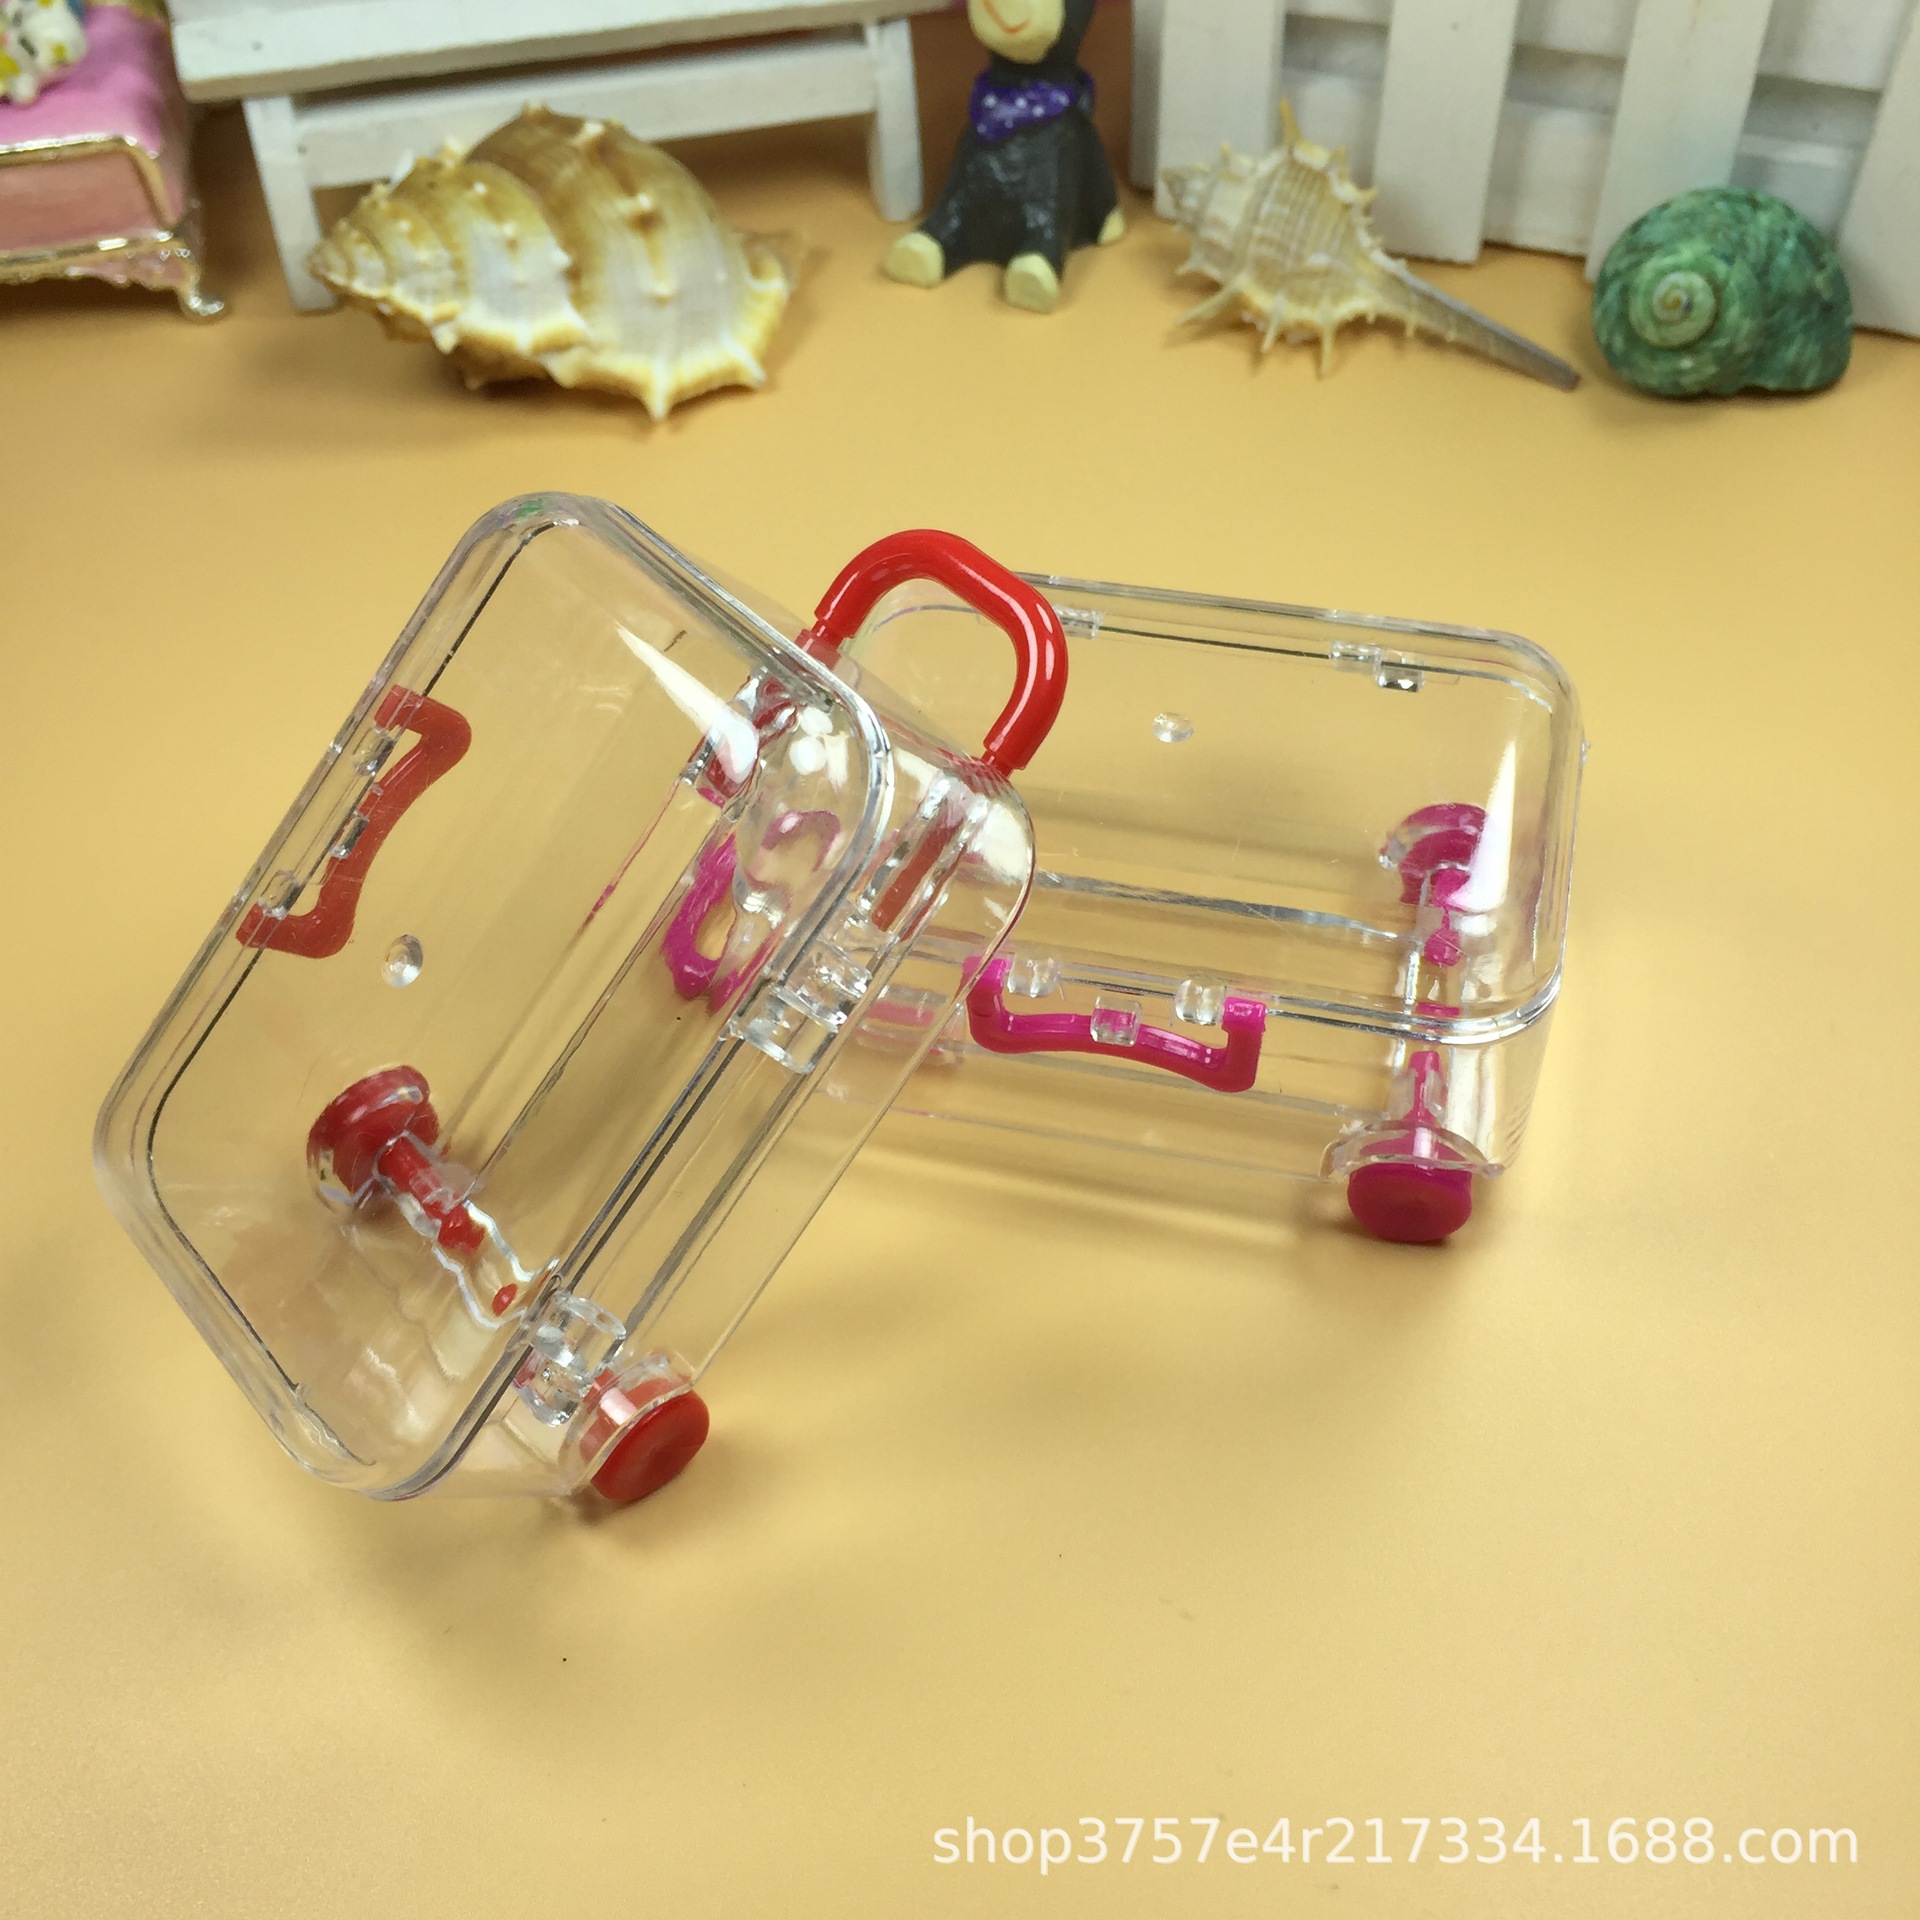 Foreign Trade E-Commerce Cross-Border Supply Personalized Creative Wedding Candies Box Transparent Trolley Case Luggage Suitcase Factory Wholesale